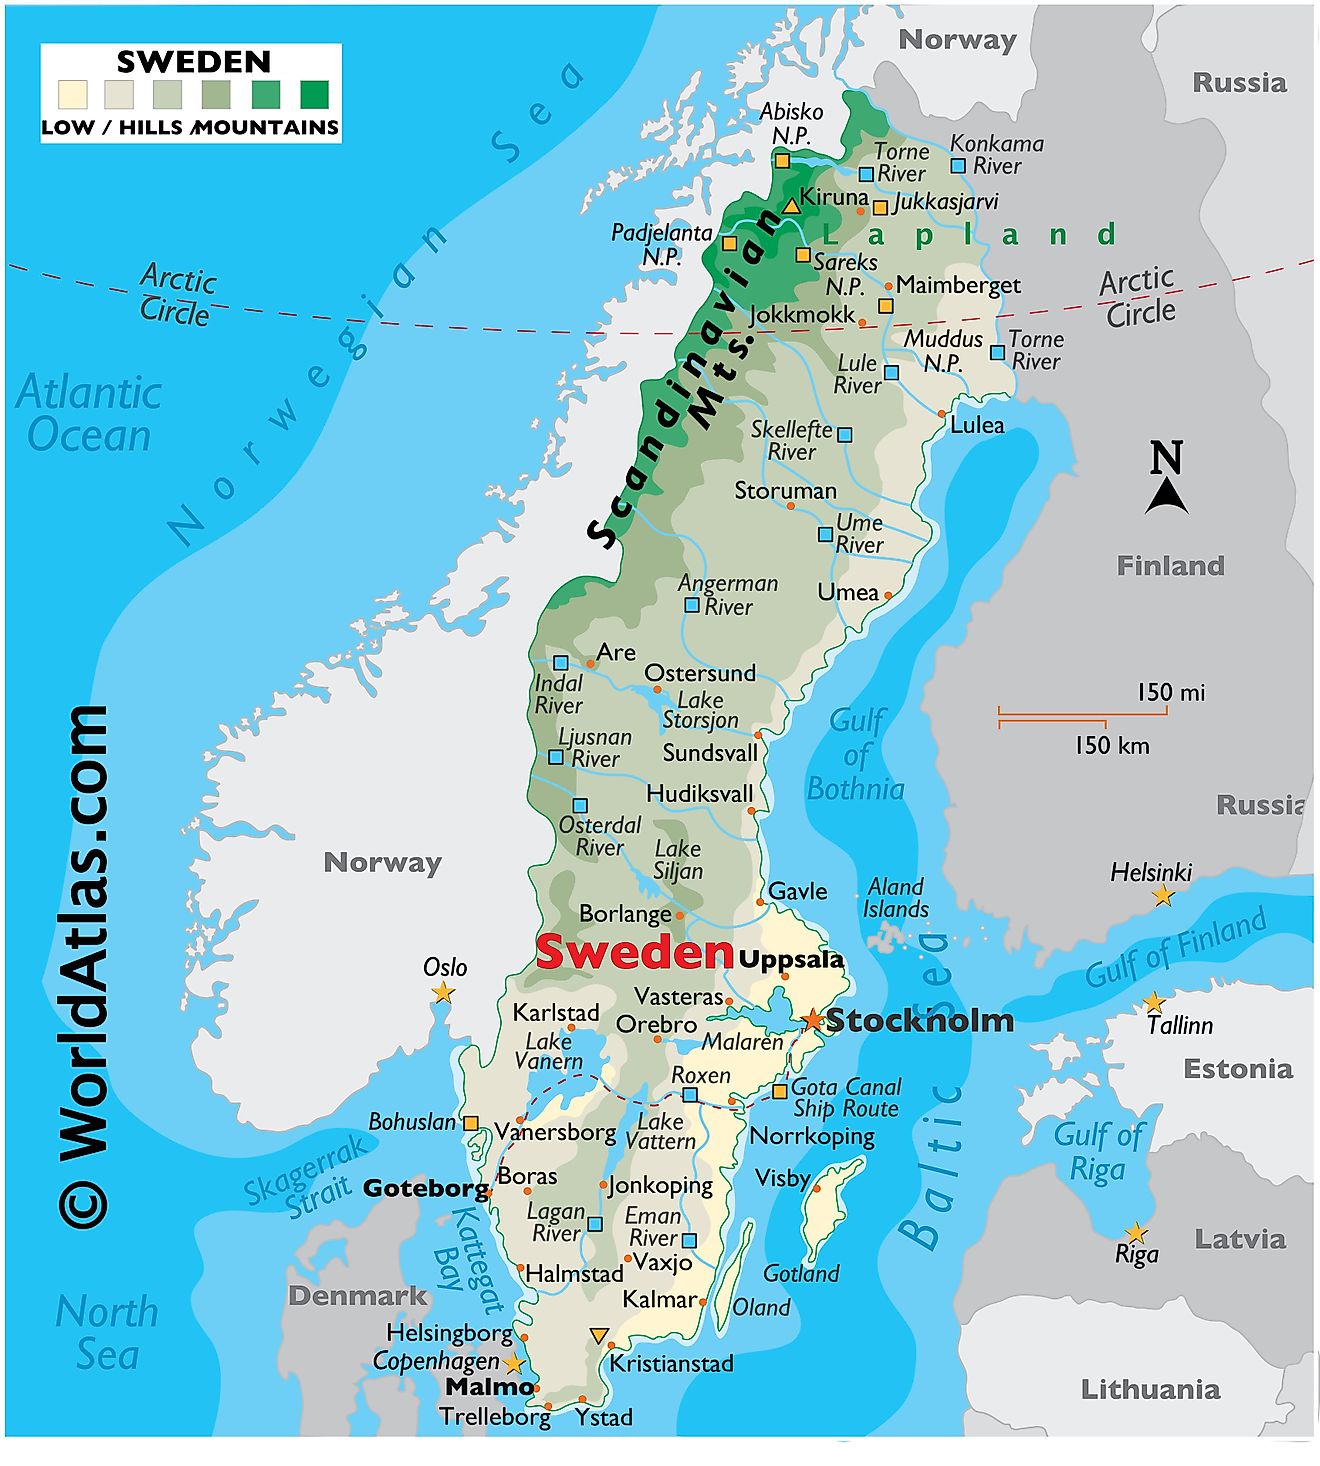 Physical Map of Sweden showing its relief, state boundaries, mountains, extreme points, major lakes, rivers, important cities, etc.